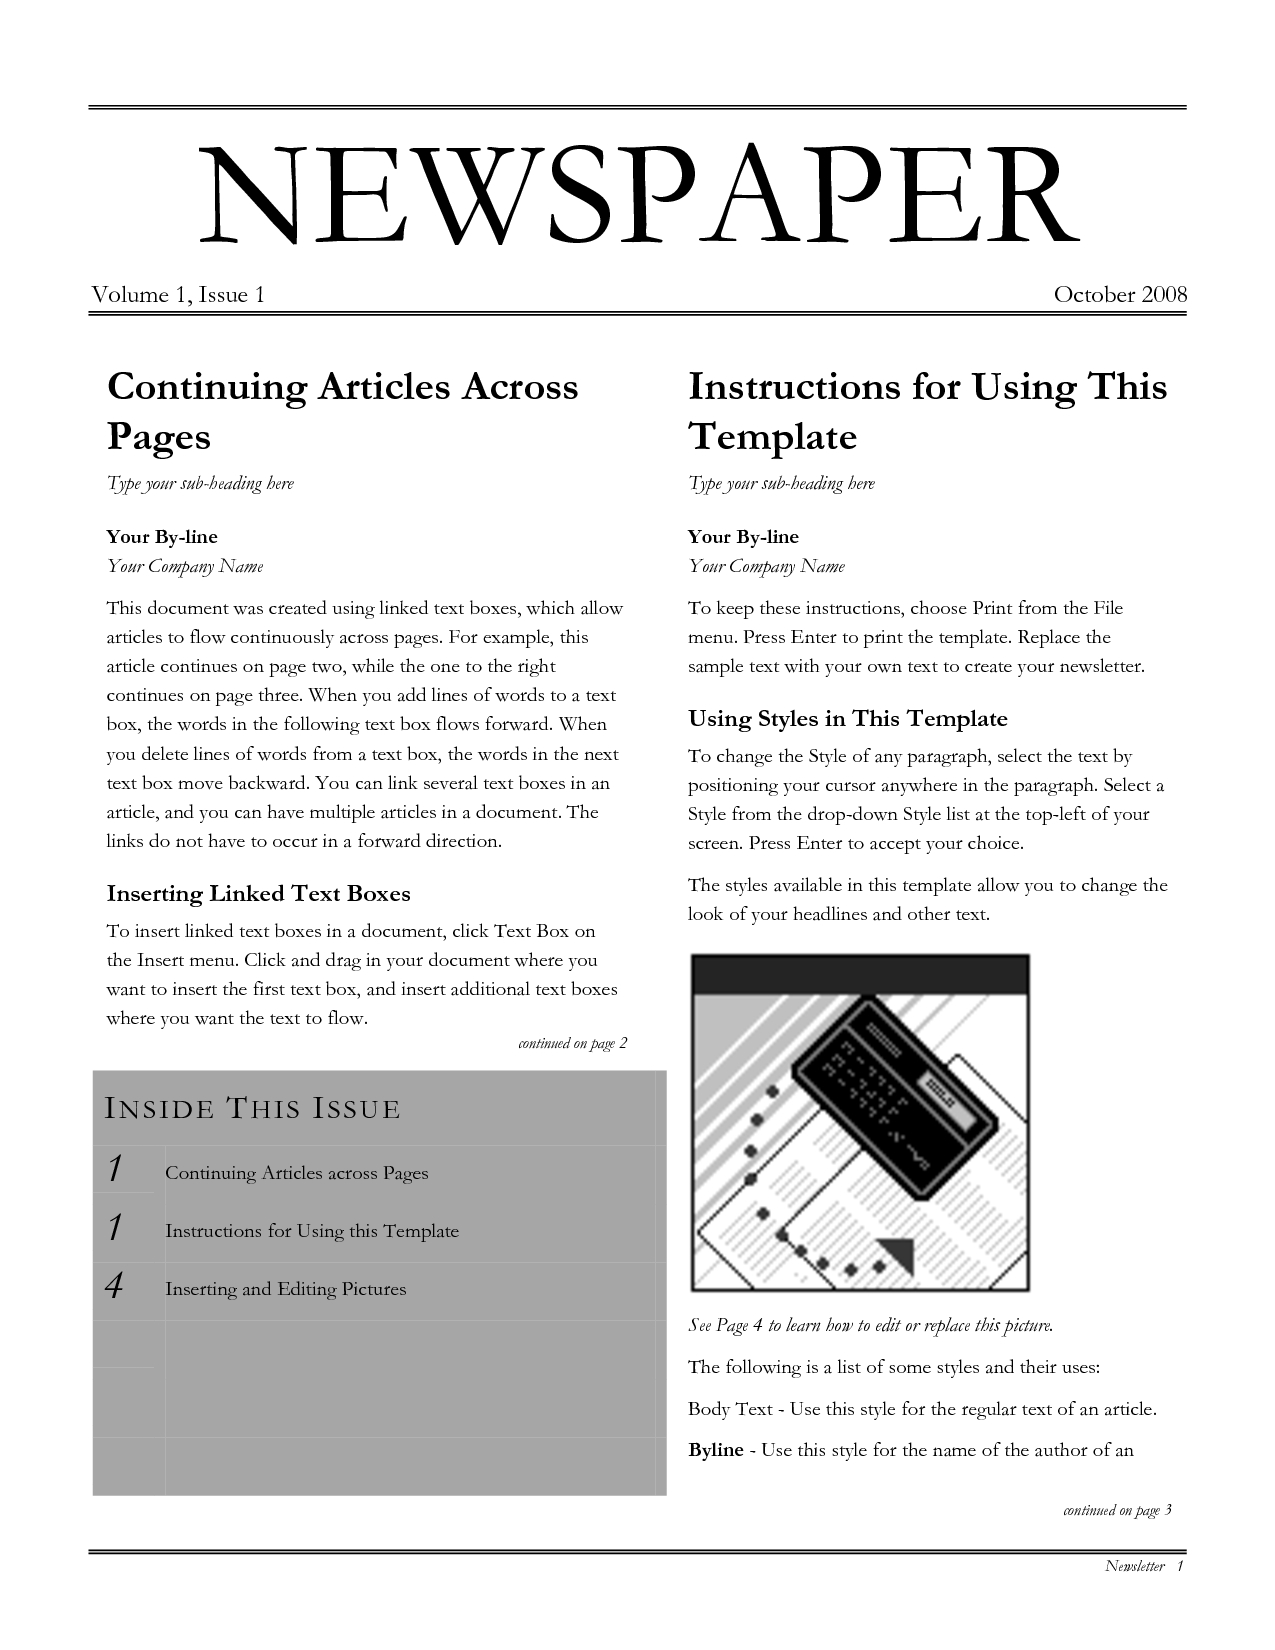 Free Newspaper Template Png, Download Free Clip Art, Free Intended For Old Newspaper Template Word Free